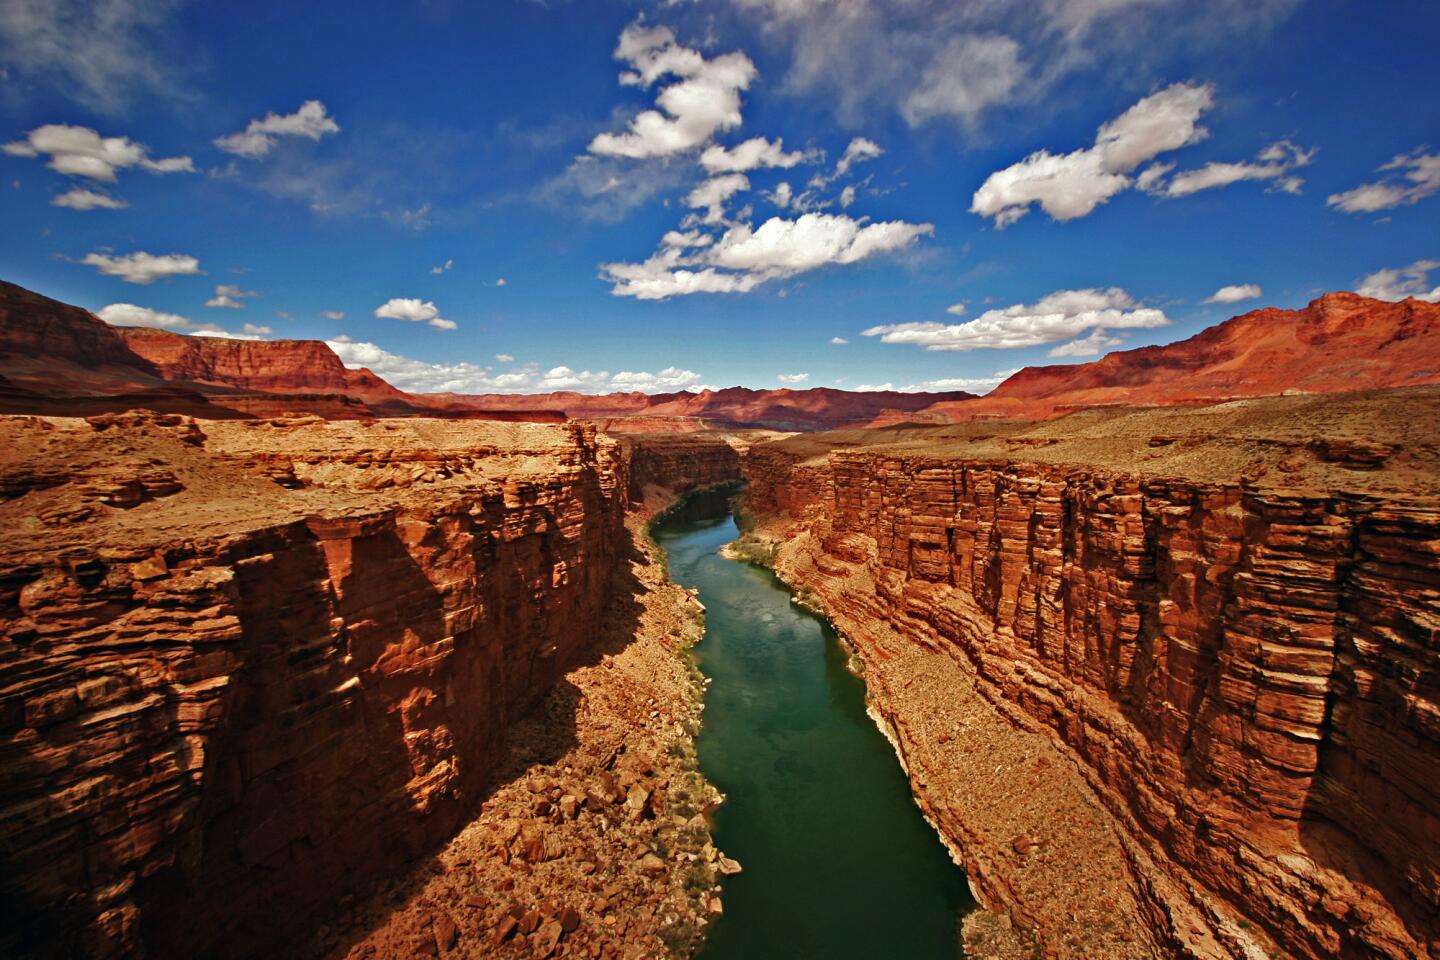 Visitors in 2011: 4,298,178 Established in 1919, the Grand Canyon is perhaps the most famous of America's national parks. It is an enormous stretch of canyon: 277 miles long (measured by the length of the river at its bottom), 6,000 vertical feet at its deepest and as much as 18 miles across in some places. It takes about two days to get to the bottom of the canyon and back on foot. And it receives close to 5 million visitors each year. More info: http://www.nps.gov/grca/index.htm